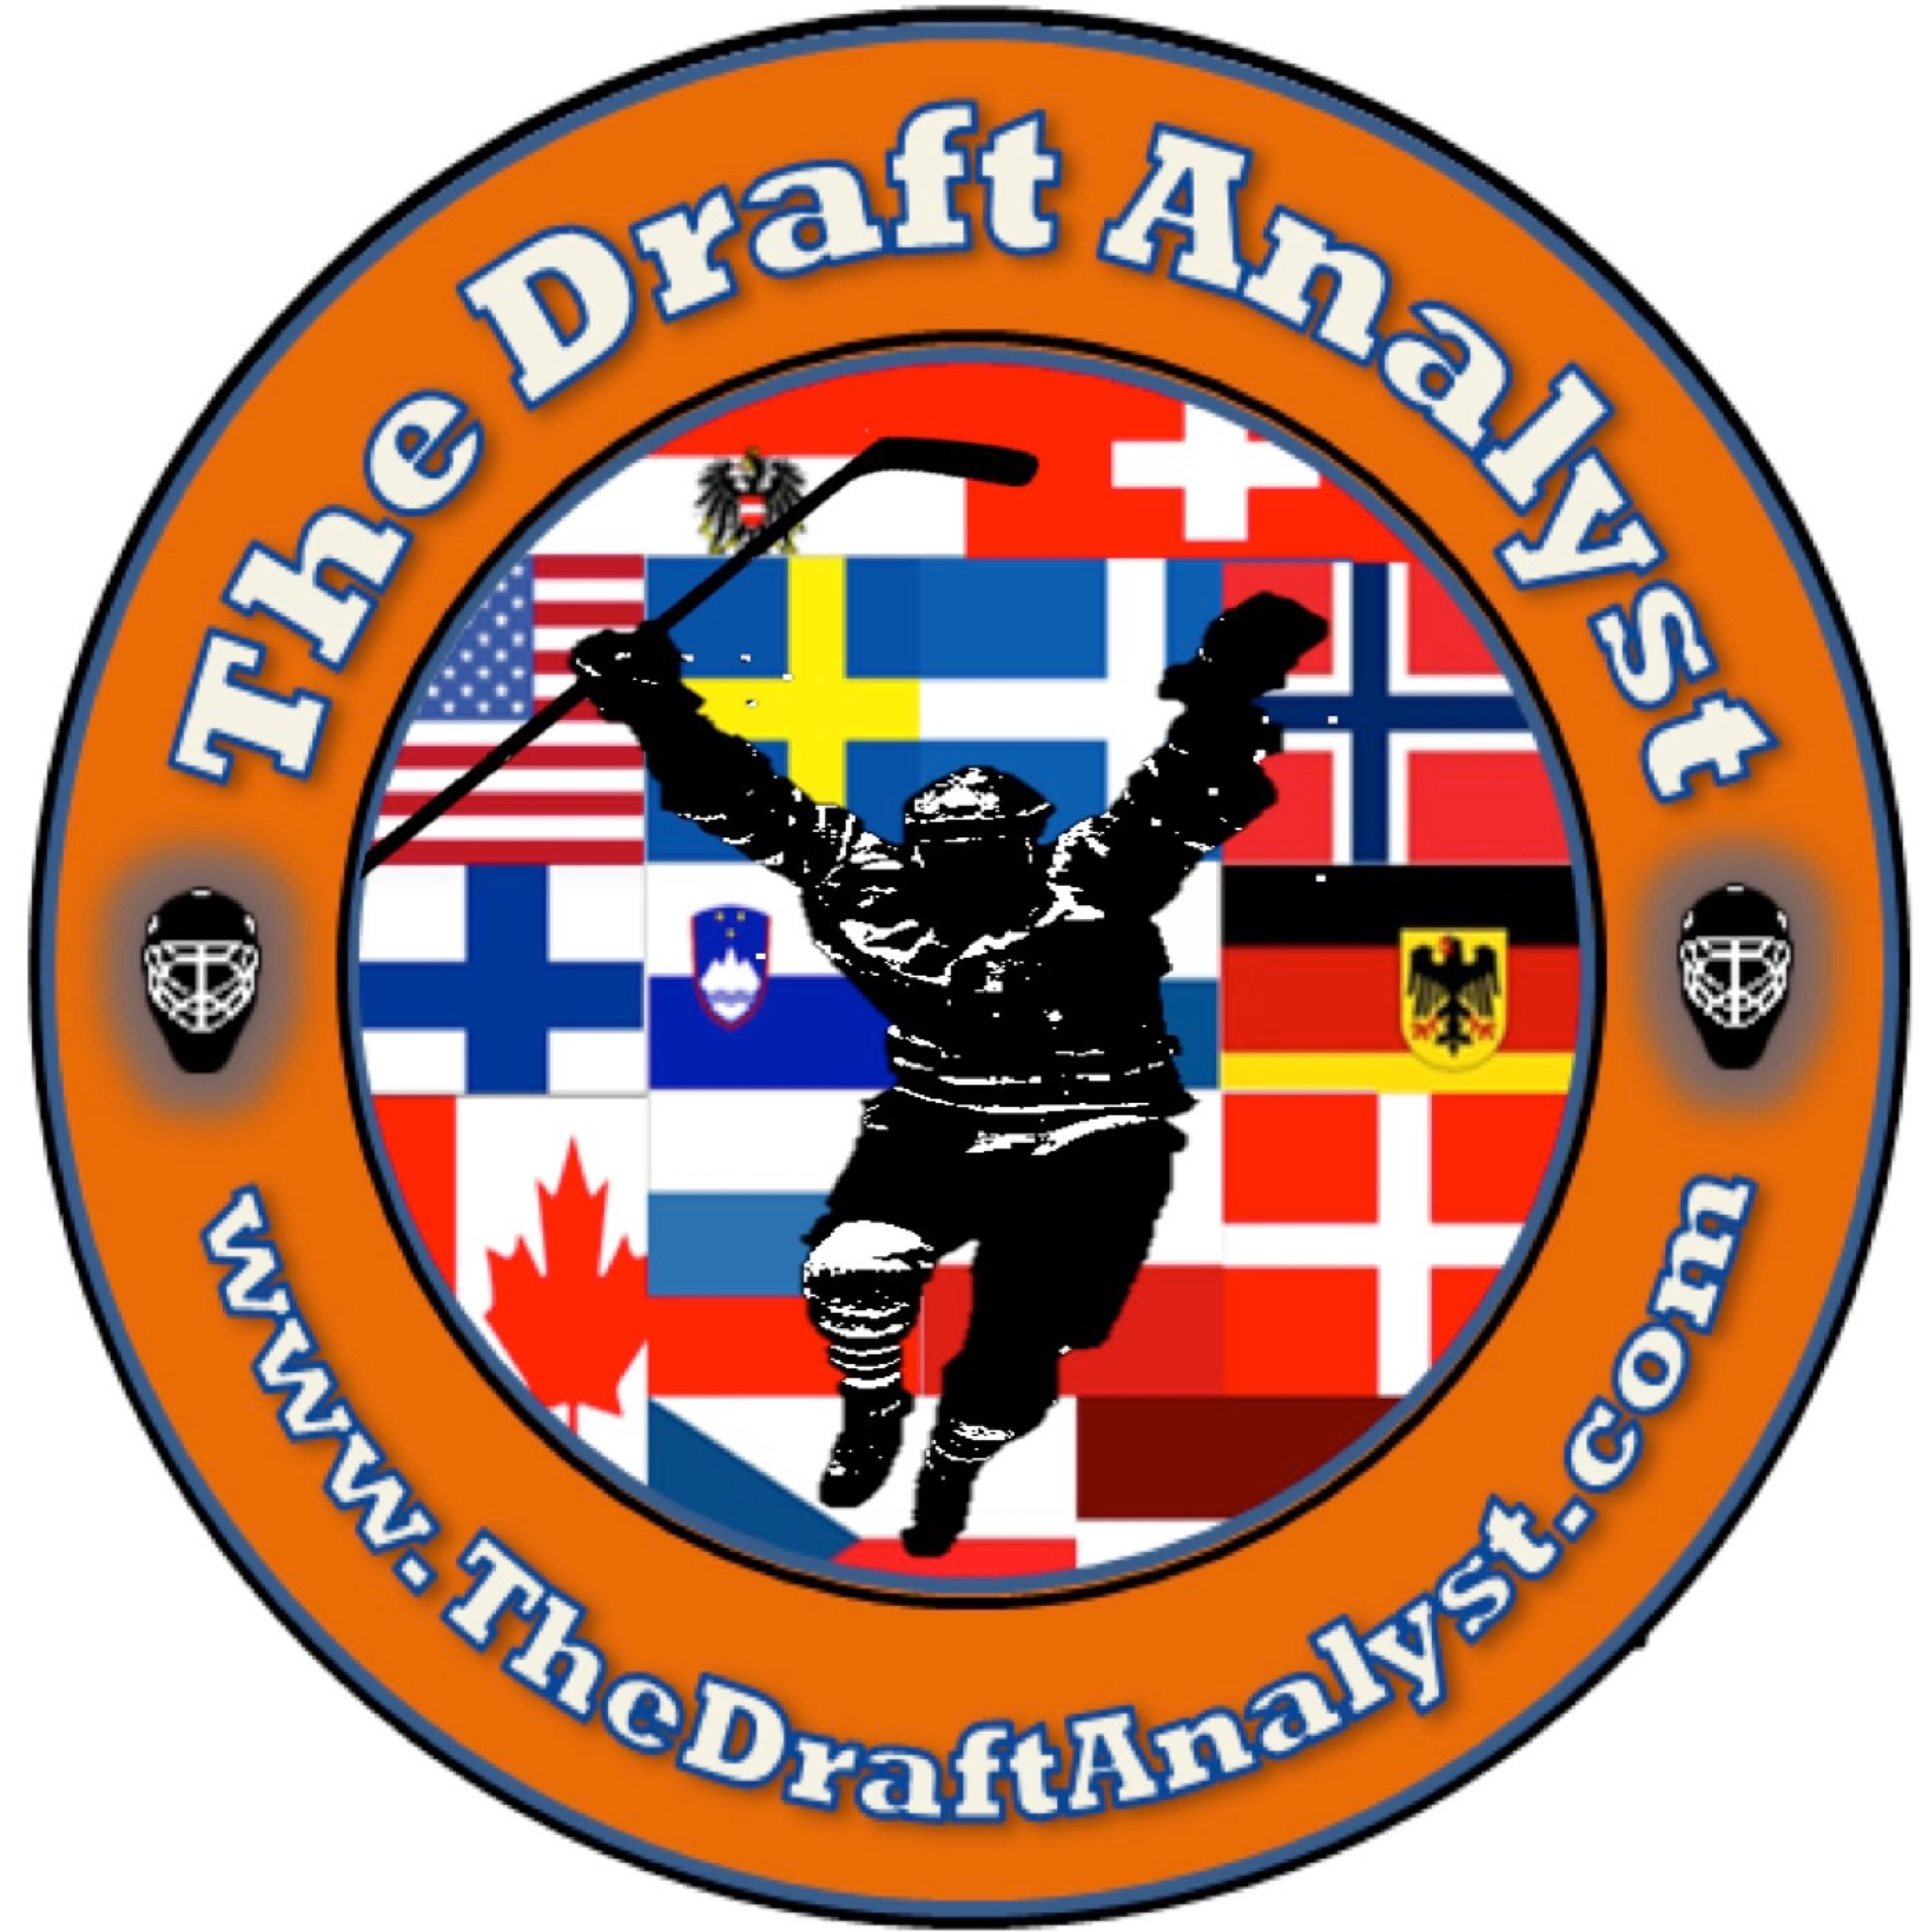 Episode 12 07.18.17 2018 NHL Draft Preview